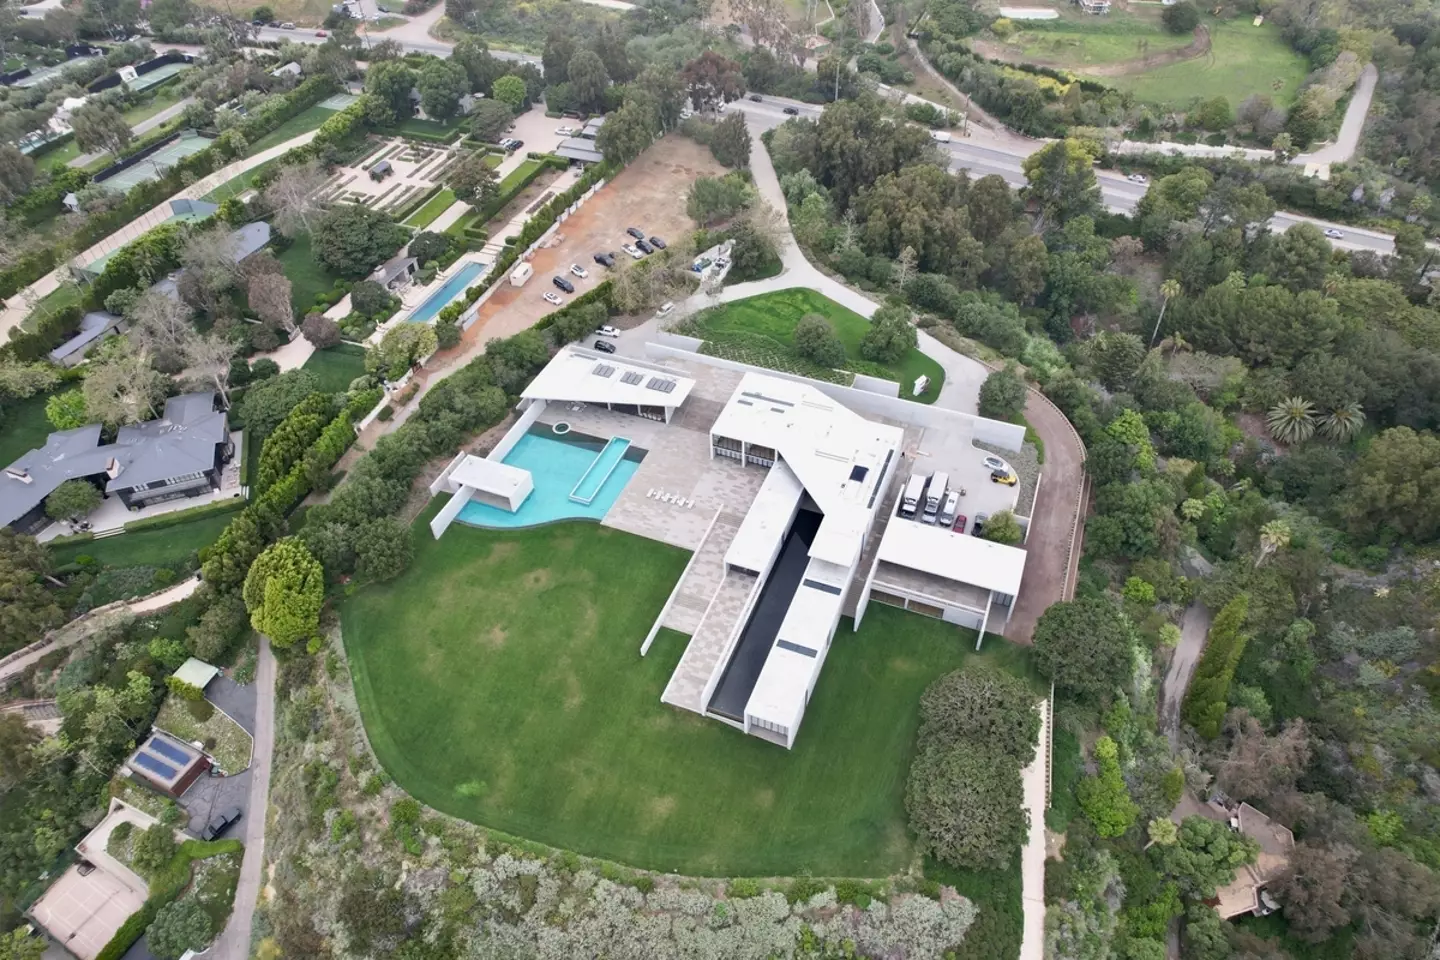 The power couple's latest purchase is a huge home in Malibu.